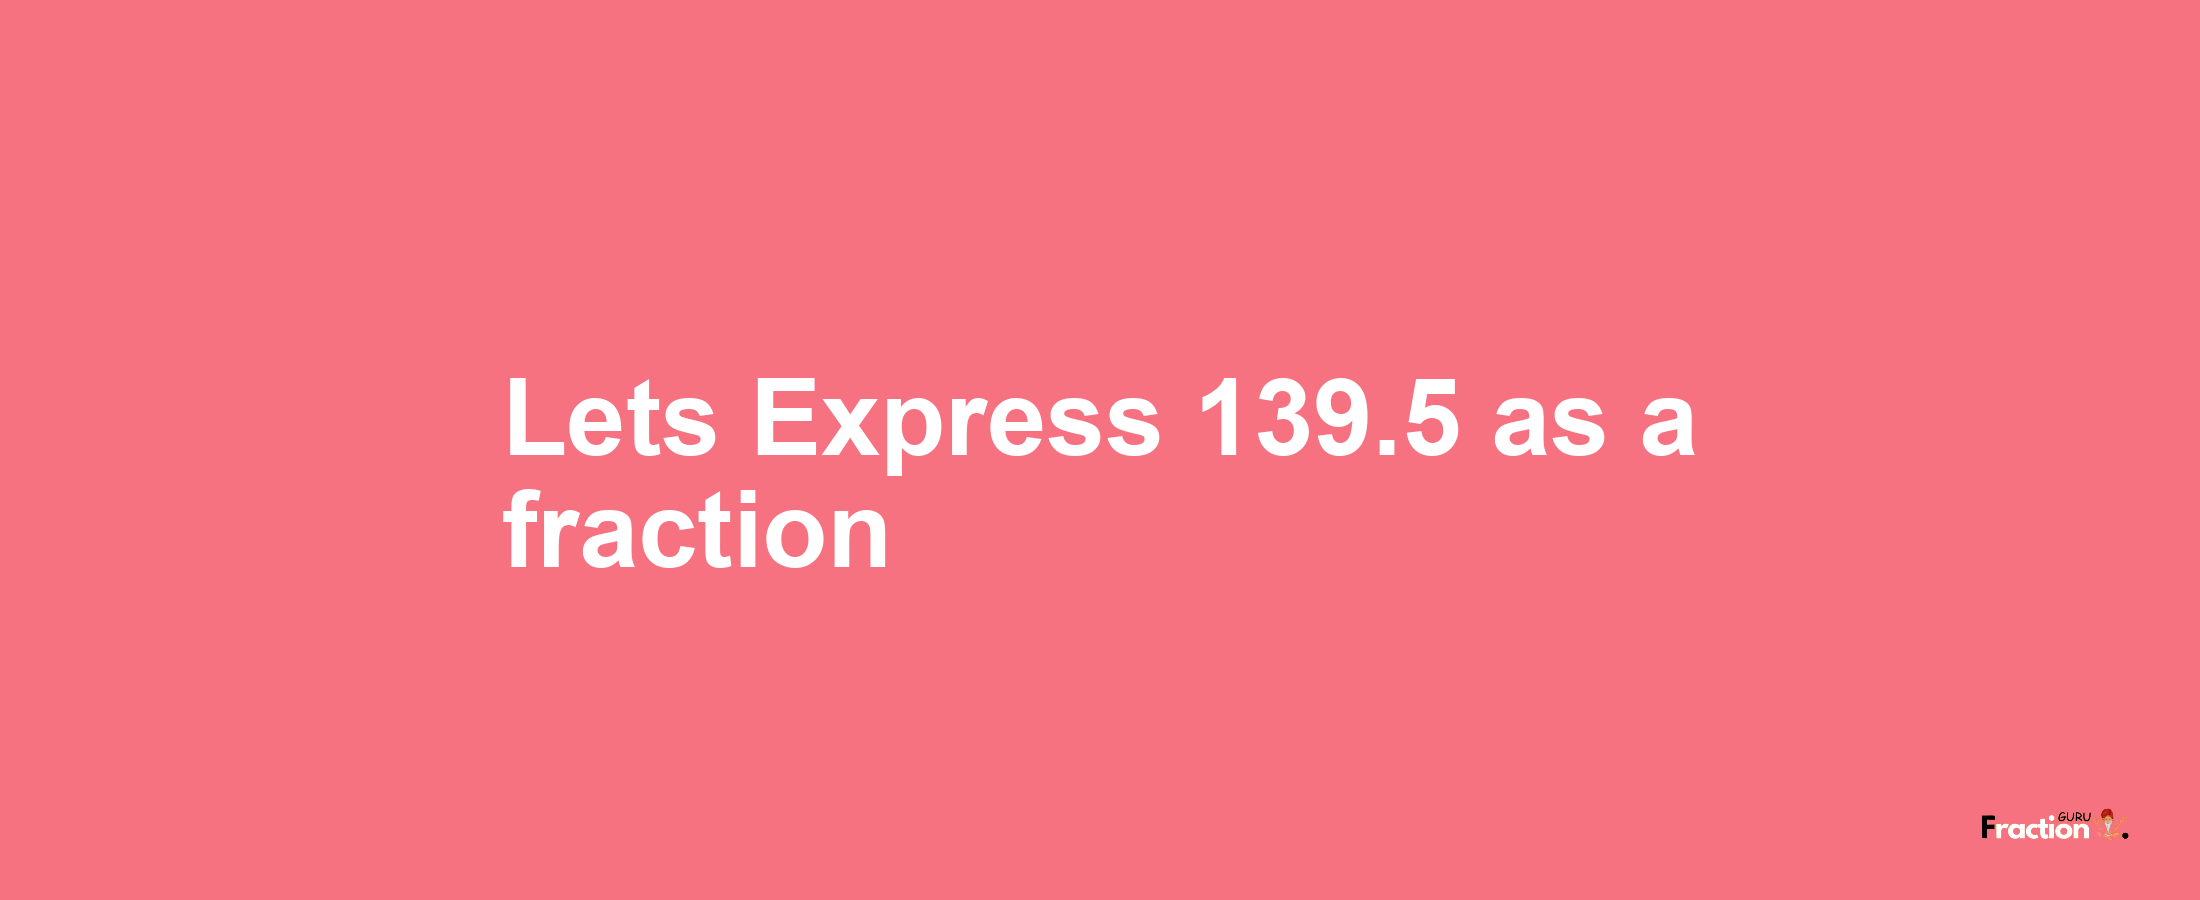 Lets Express 139.5 as afraction